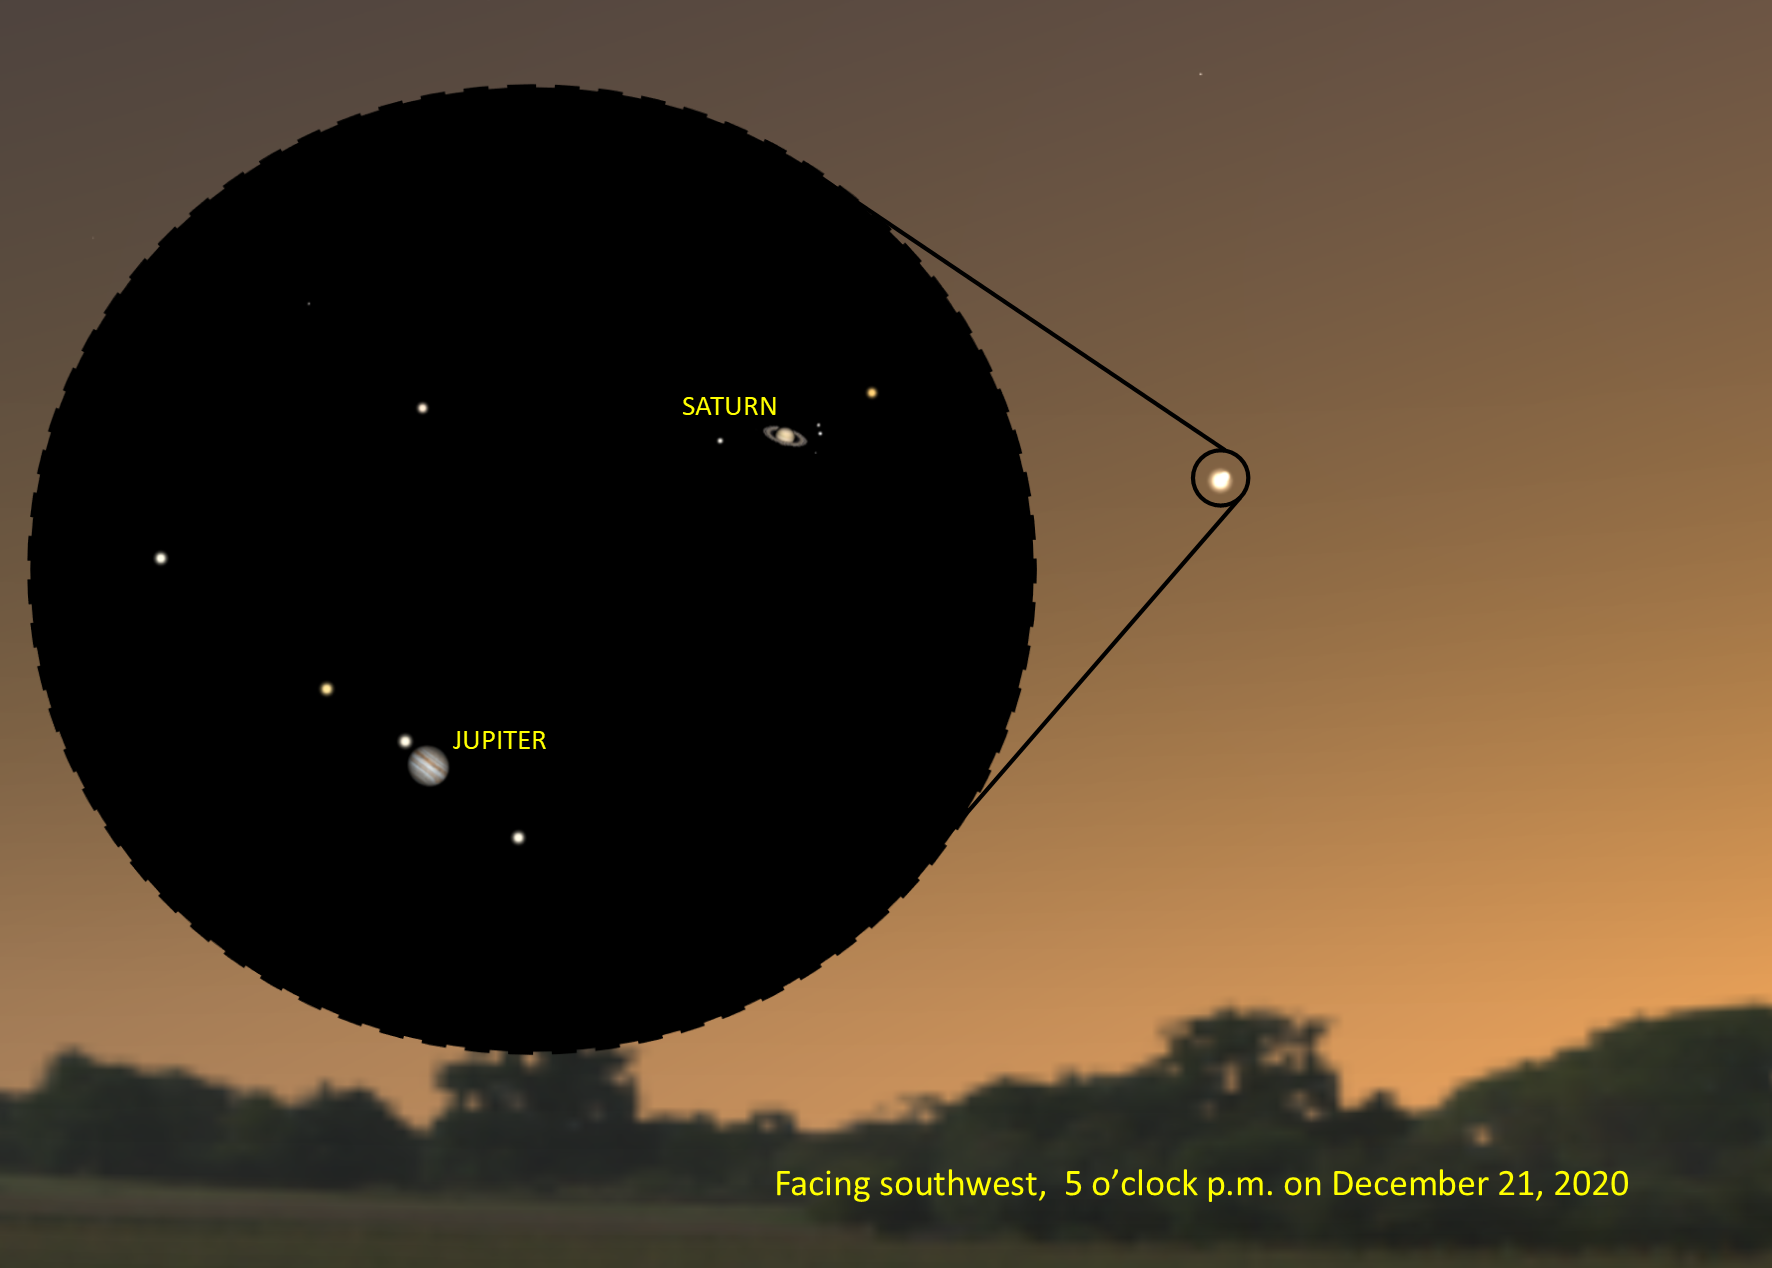 A circled star in the evening sky. A large black circle shows the zoomed-in view of the area which includes several stars as well as Saturn and Jupiter. Text aong the bottom reads, 